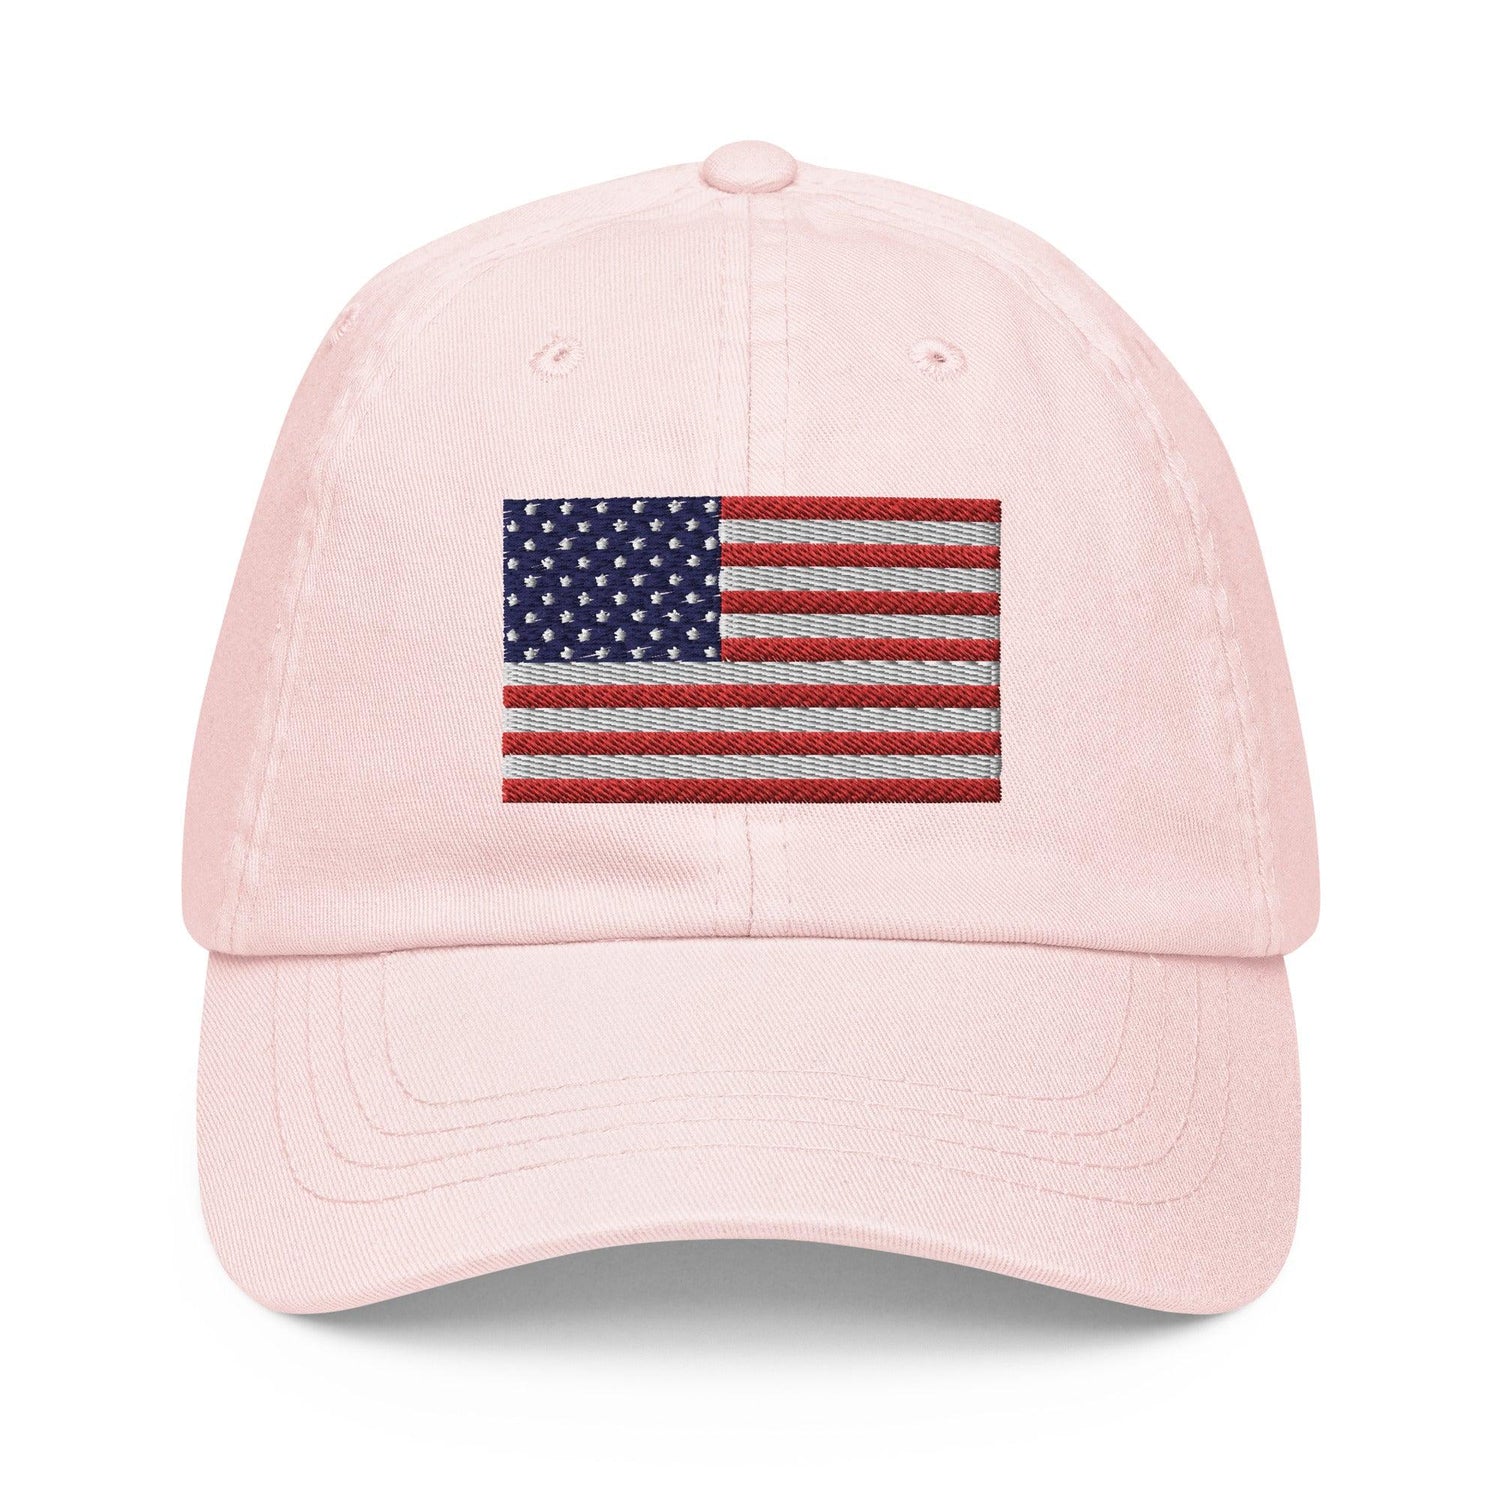 Embroidery American Flag Pastel baseball hat